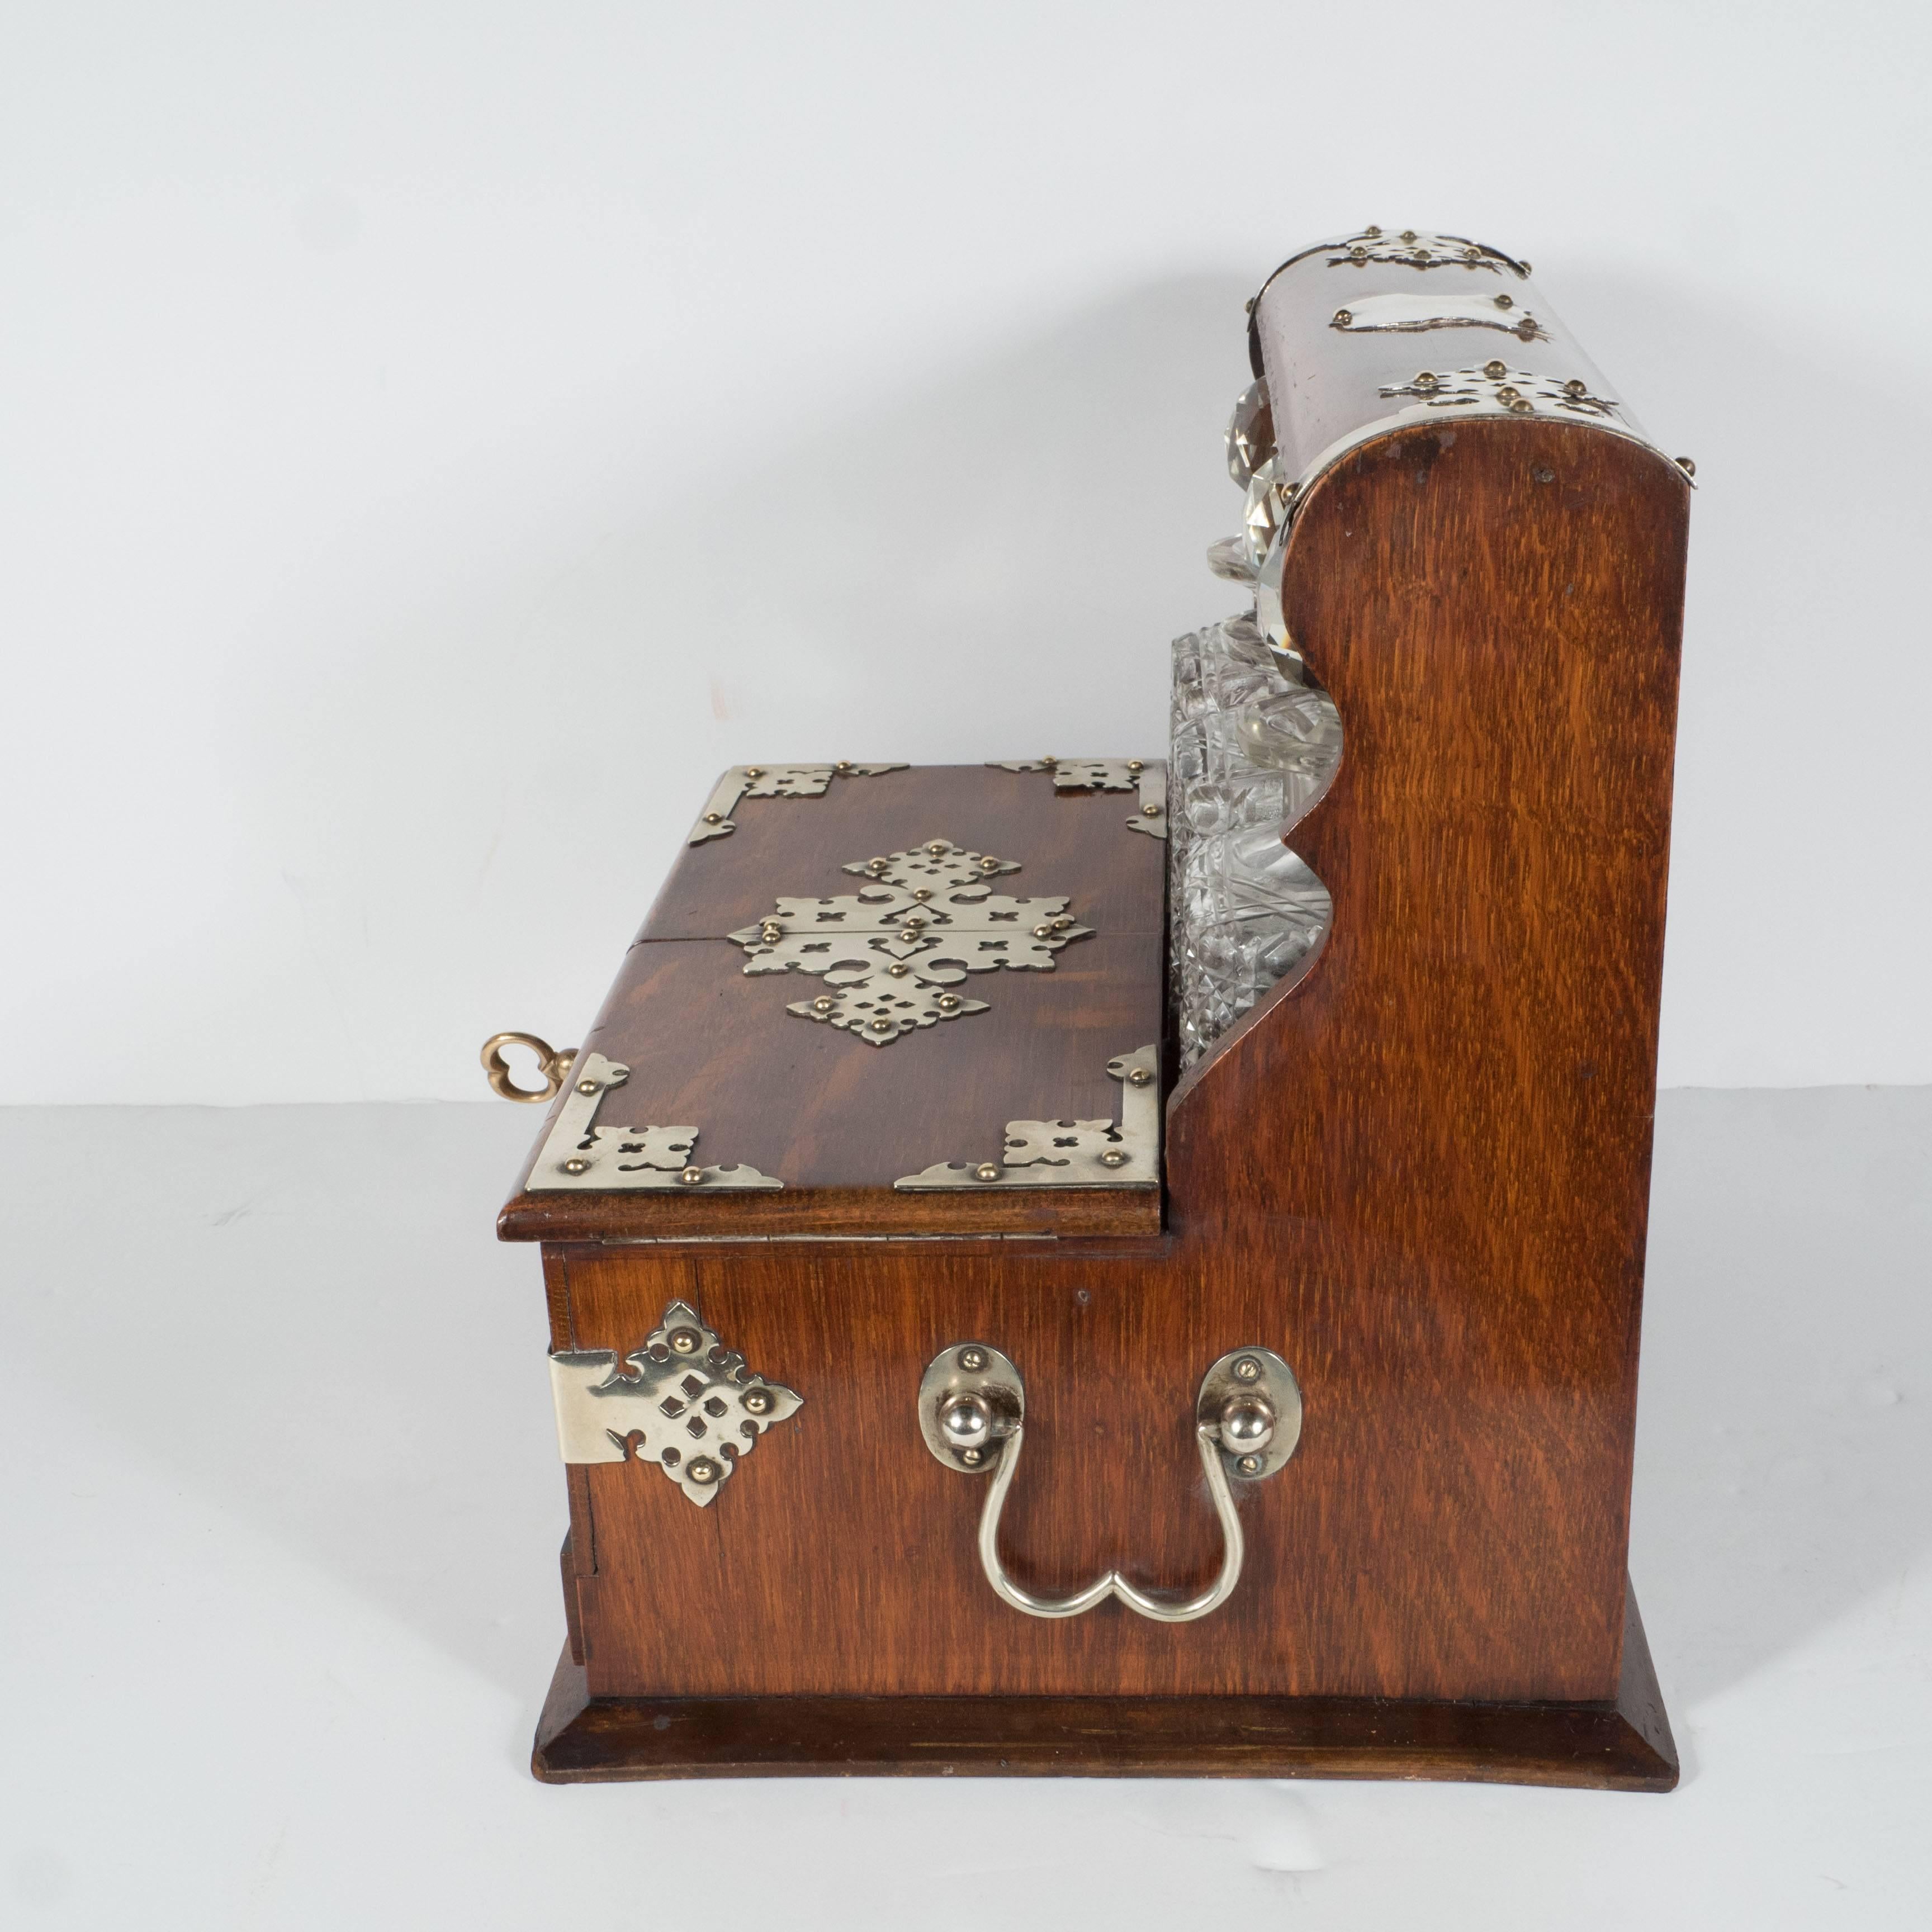 Victorian silver plate Mounted golden oak and cut-glass Tantalus/Decanter box,
Late 19th century.
It also features a hidden drawer with a secret lever to open it. Wonderful silver plate hardware.
With three hobstar-cut bottles fitted into the